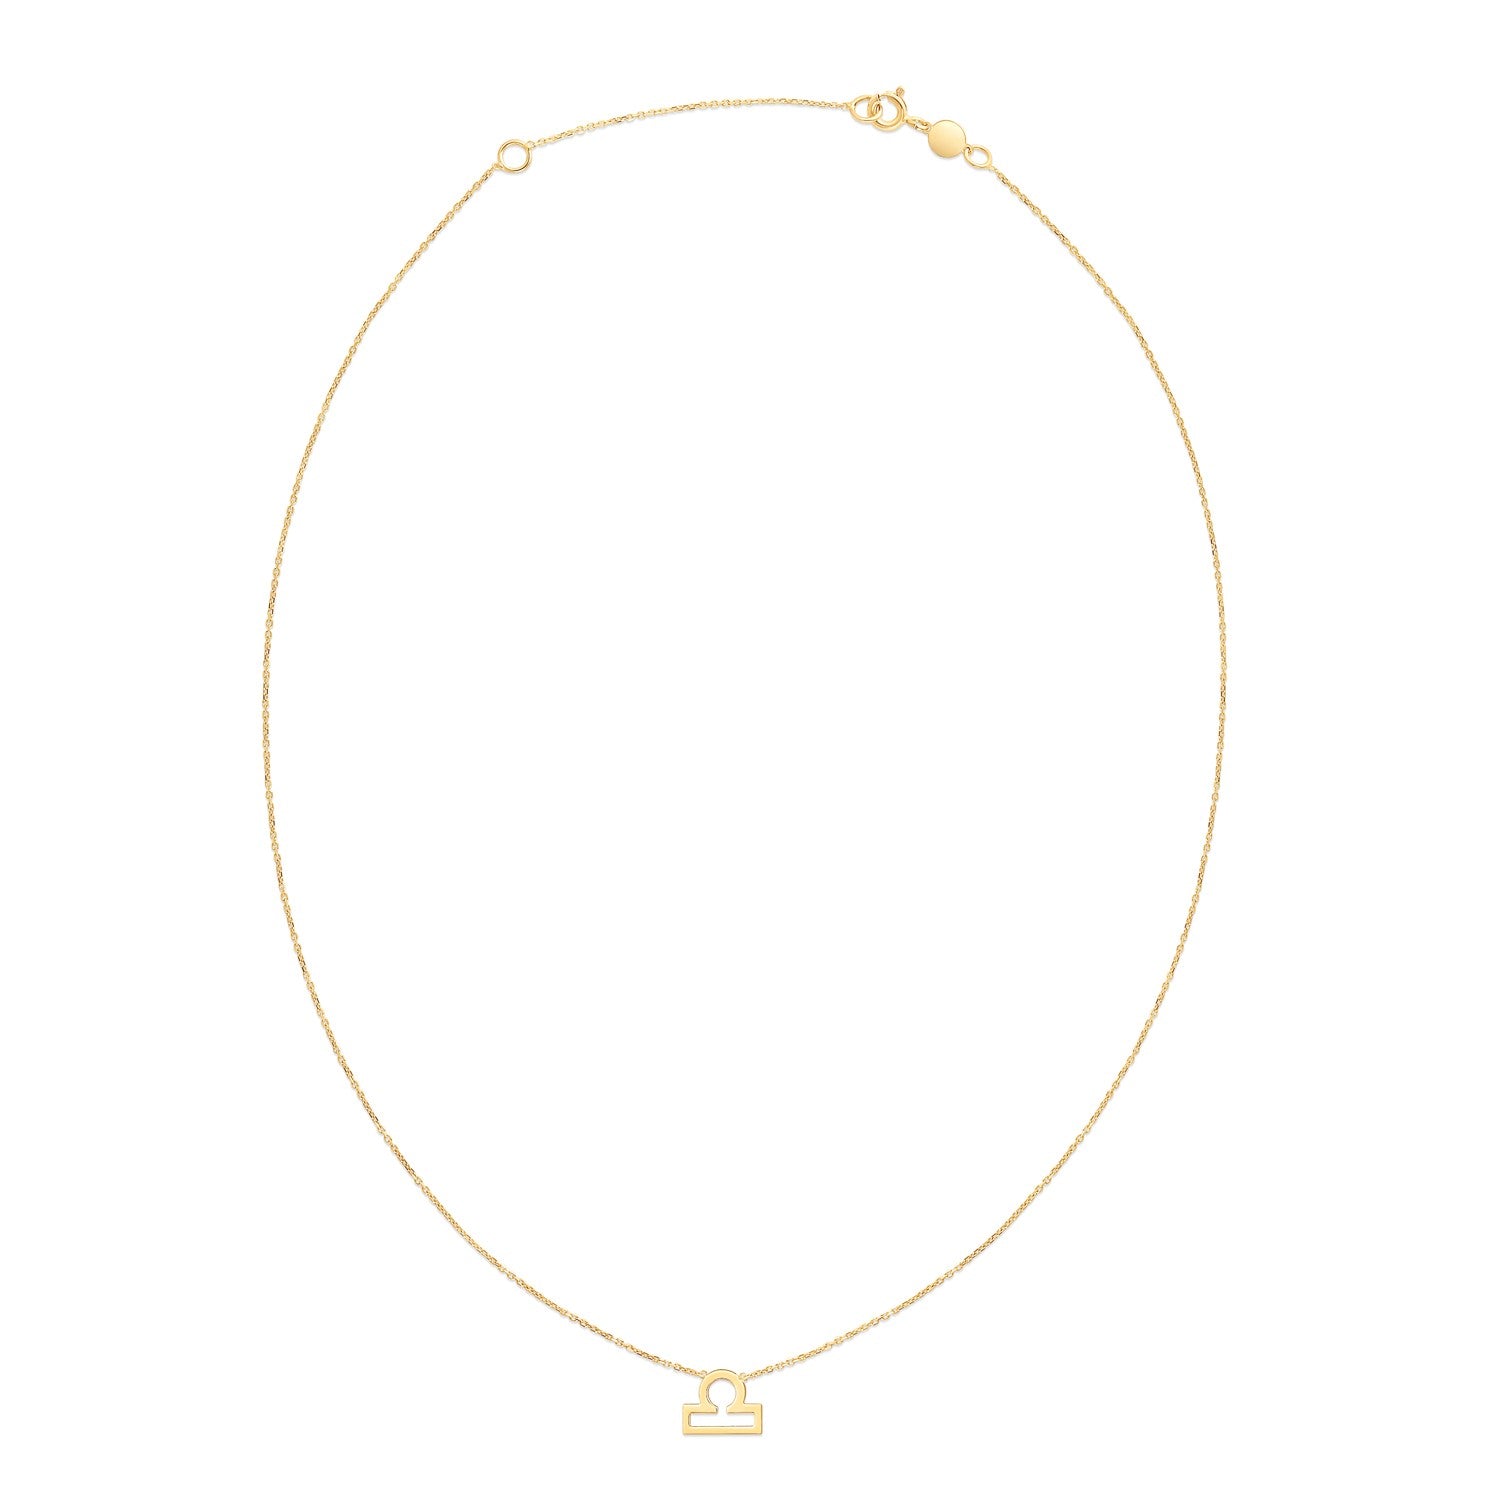 14K Yellow Gold Libra Necklace